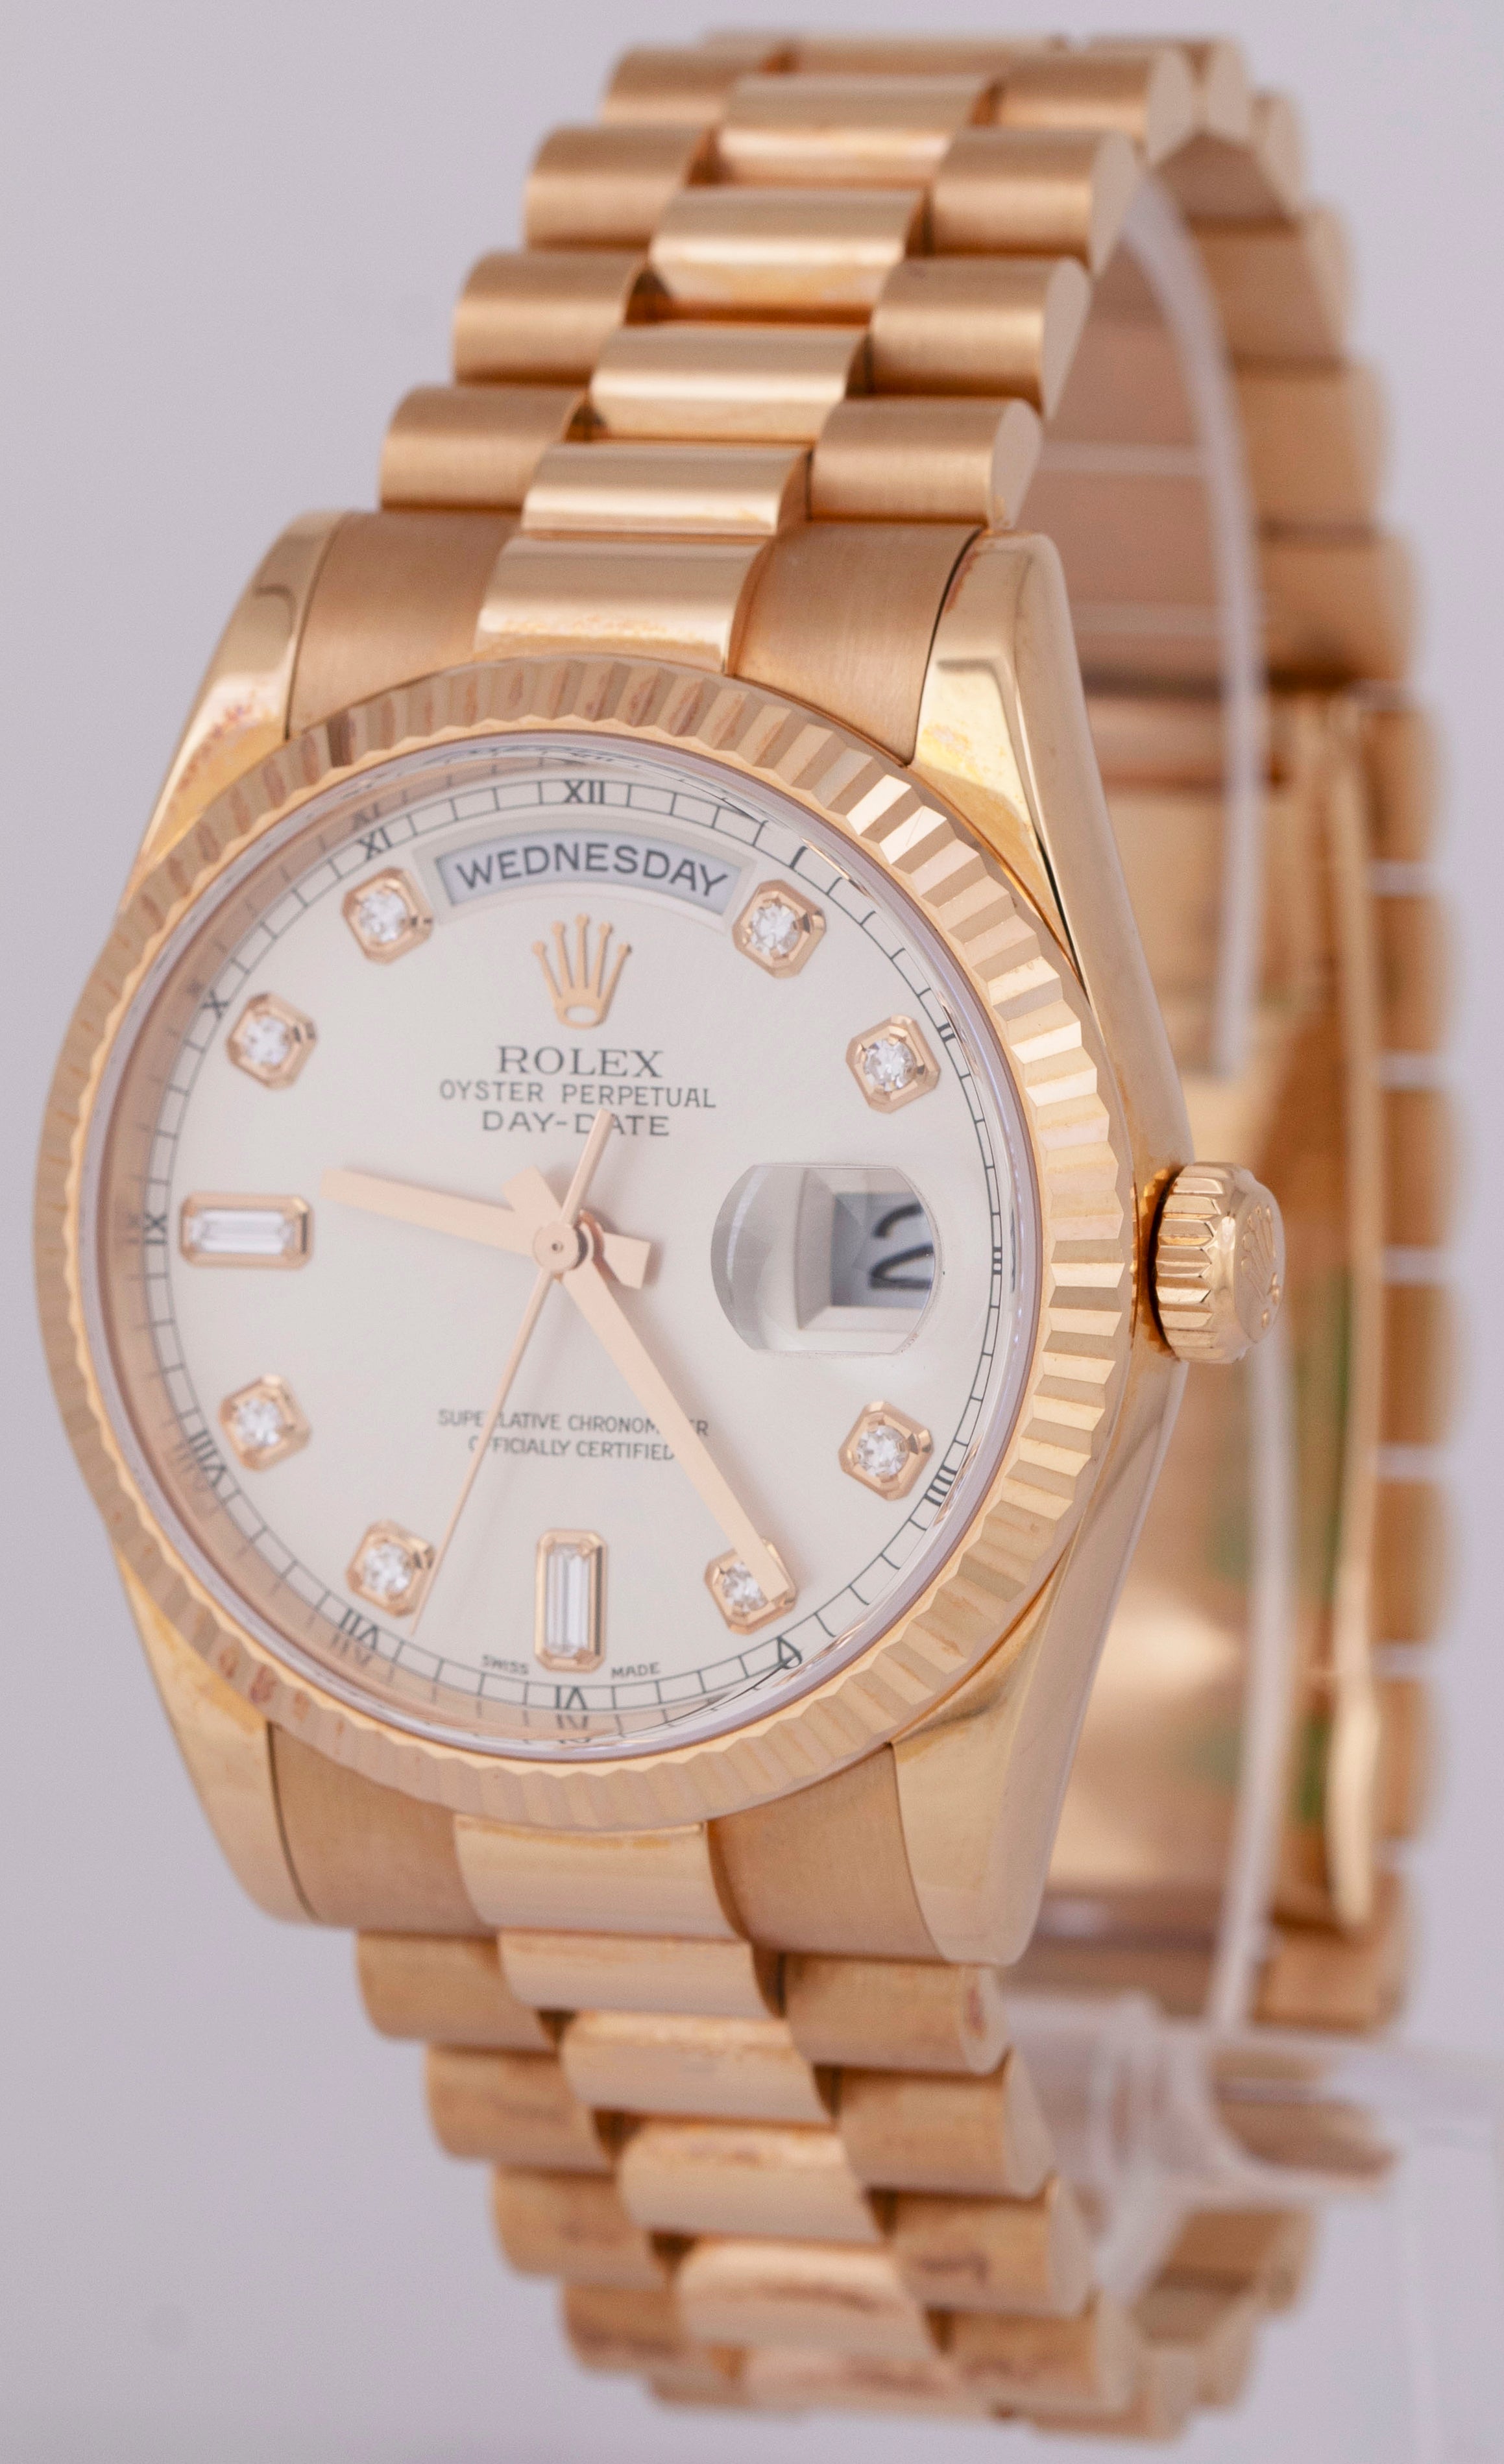 NEW PAPERS Rolex Day-Date President NOS Silver DIAMOND Rose Gold 36mm 118235 BOX